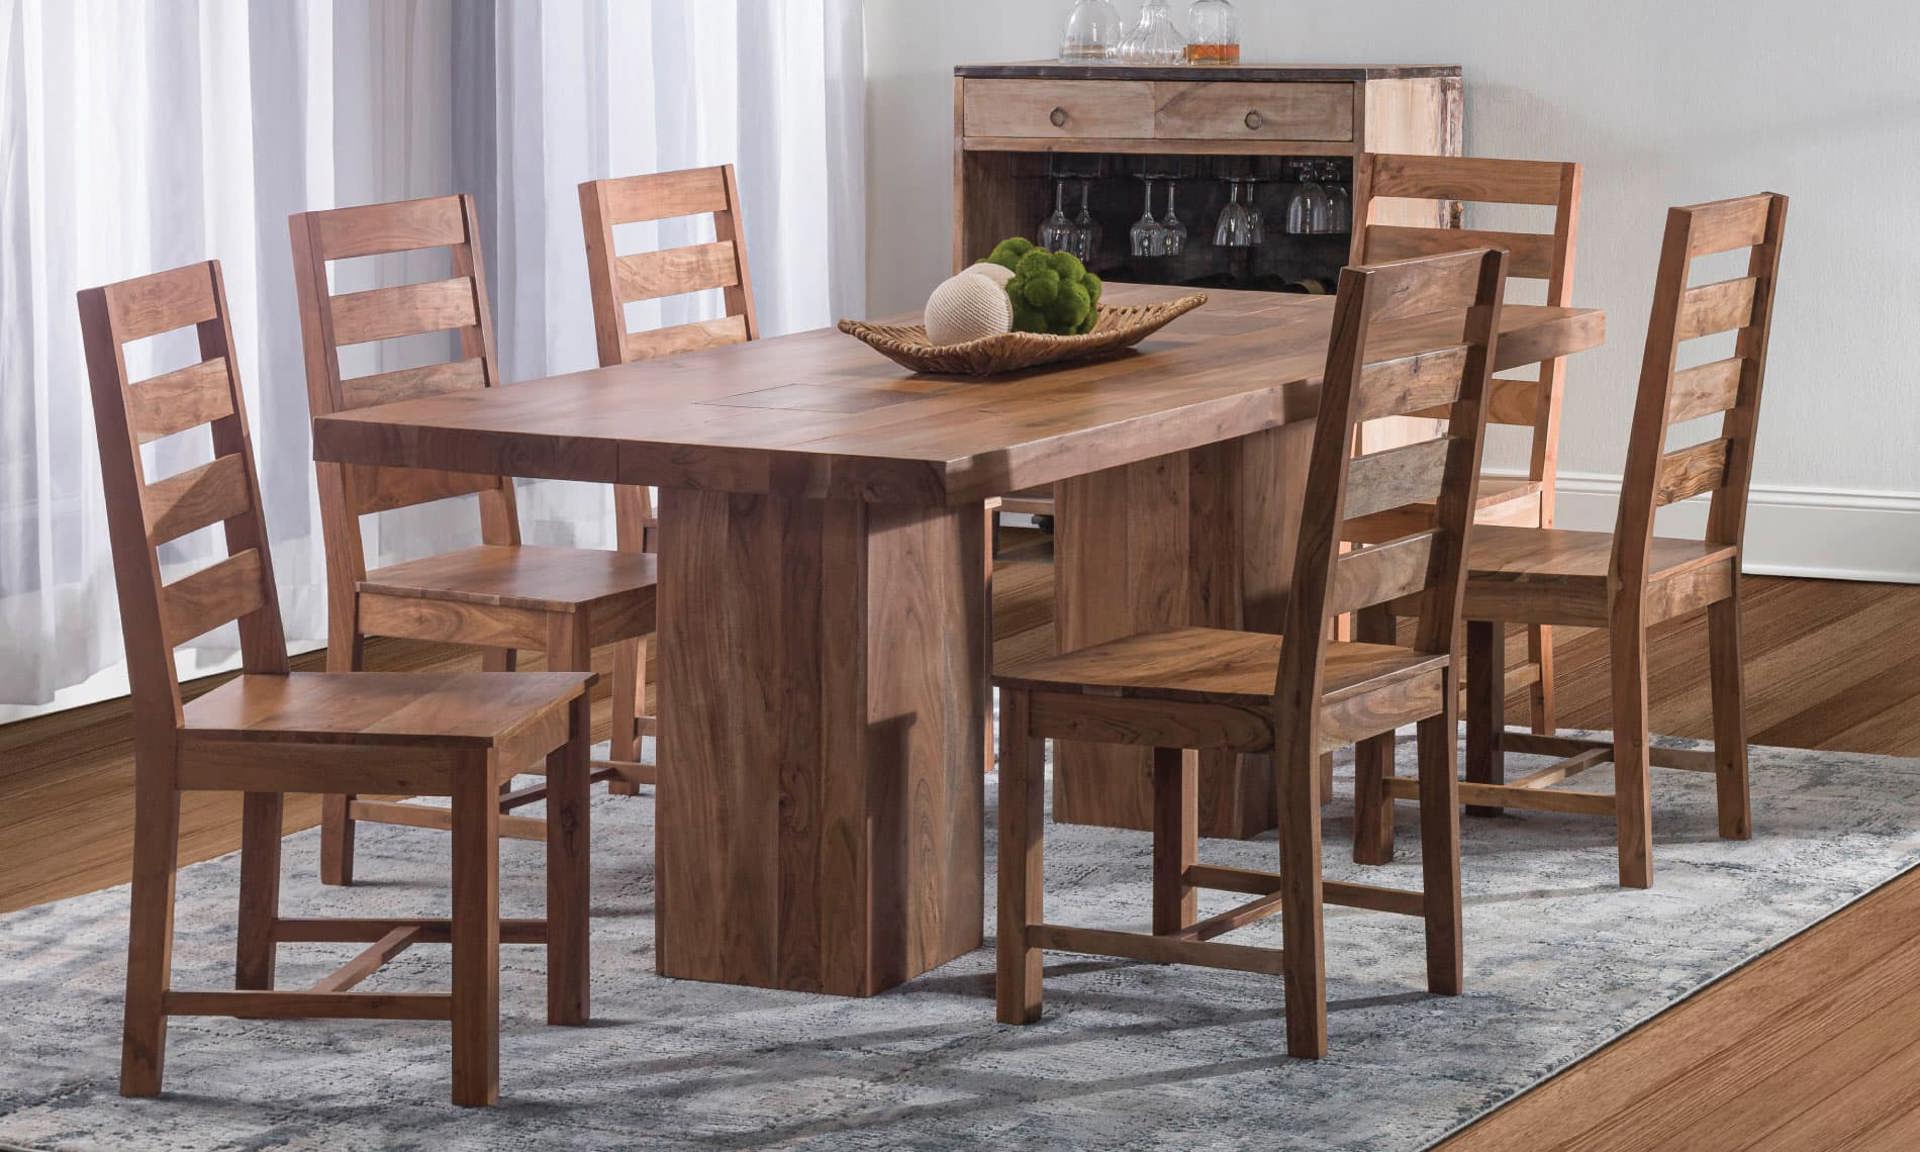 Solid wood dining room table and chairs.